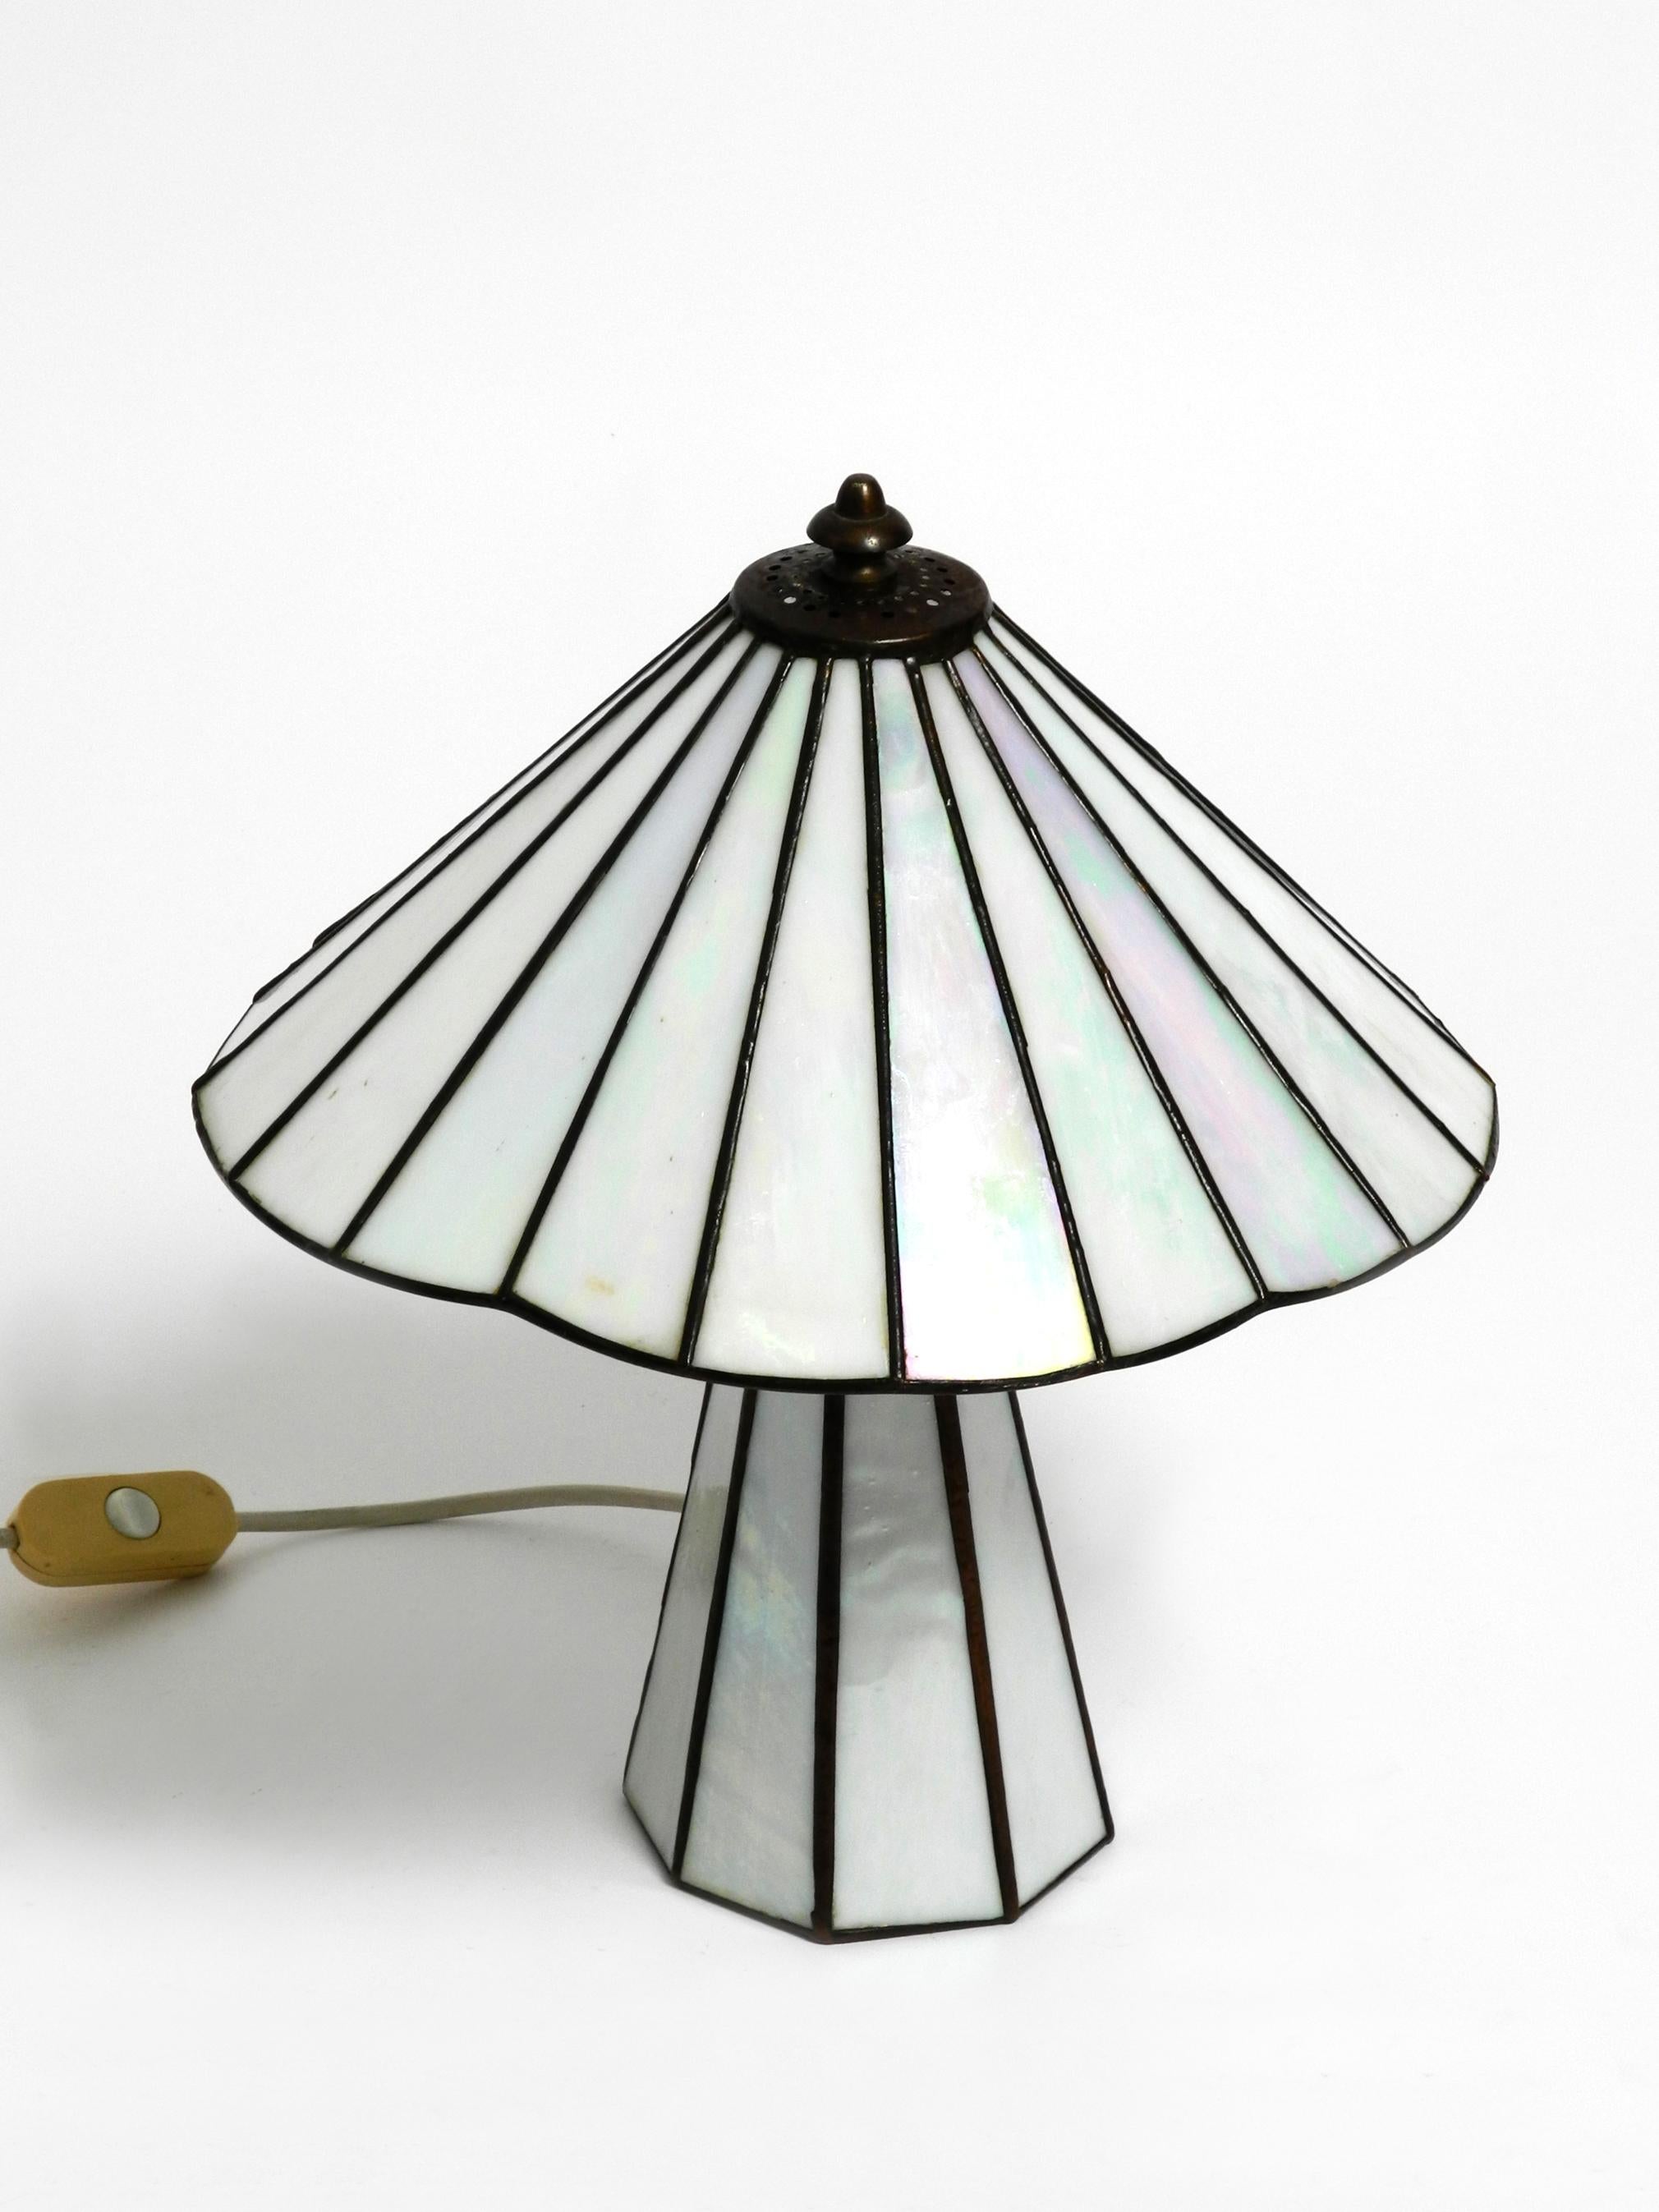 Beautiful Little 70s Tiffany Design Table Lamp Made of Mother-of-pearl Glass 8